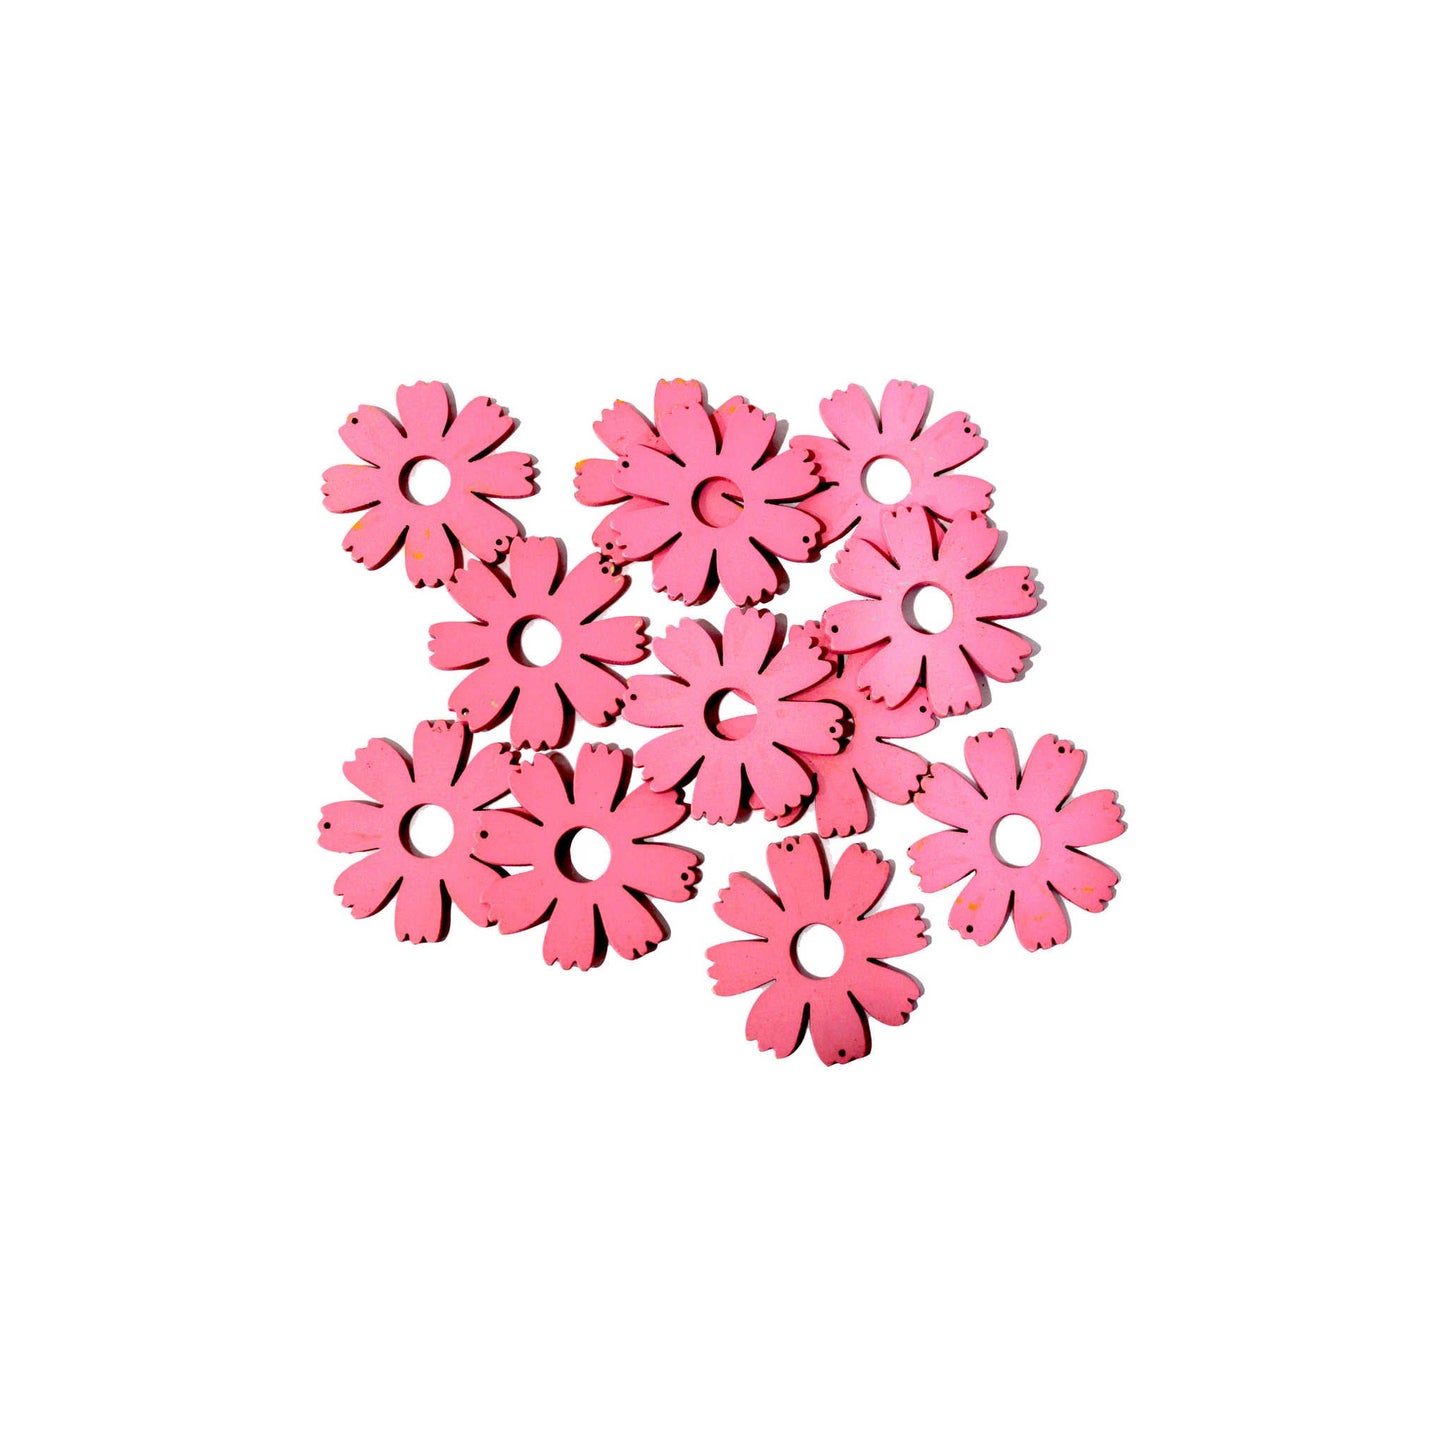 Indian Petals MDF Cutting Floral Motif for Jewelry, Craft or Decoration - 520, Big, Pink